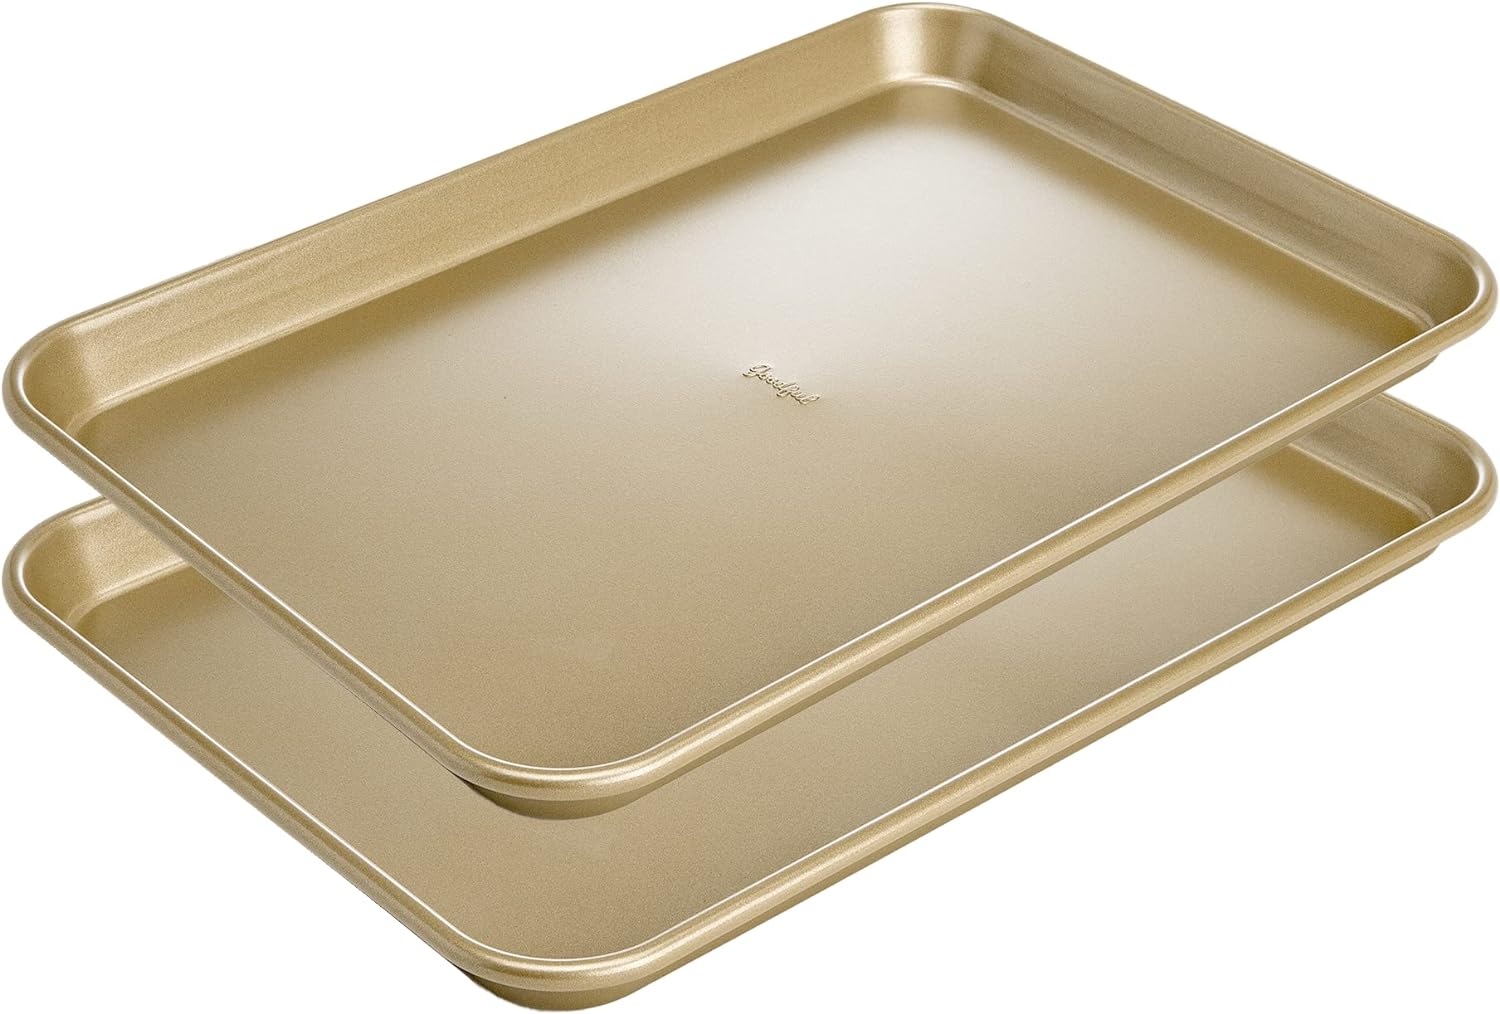 Goodful All-in-One Pan